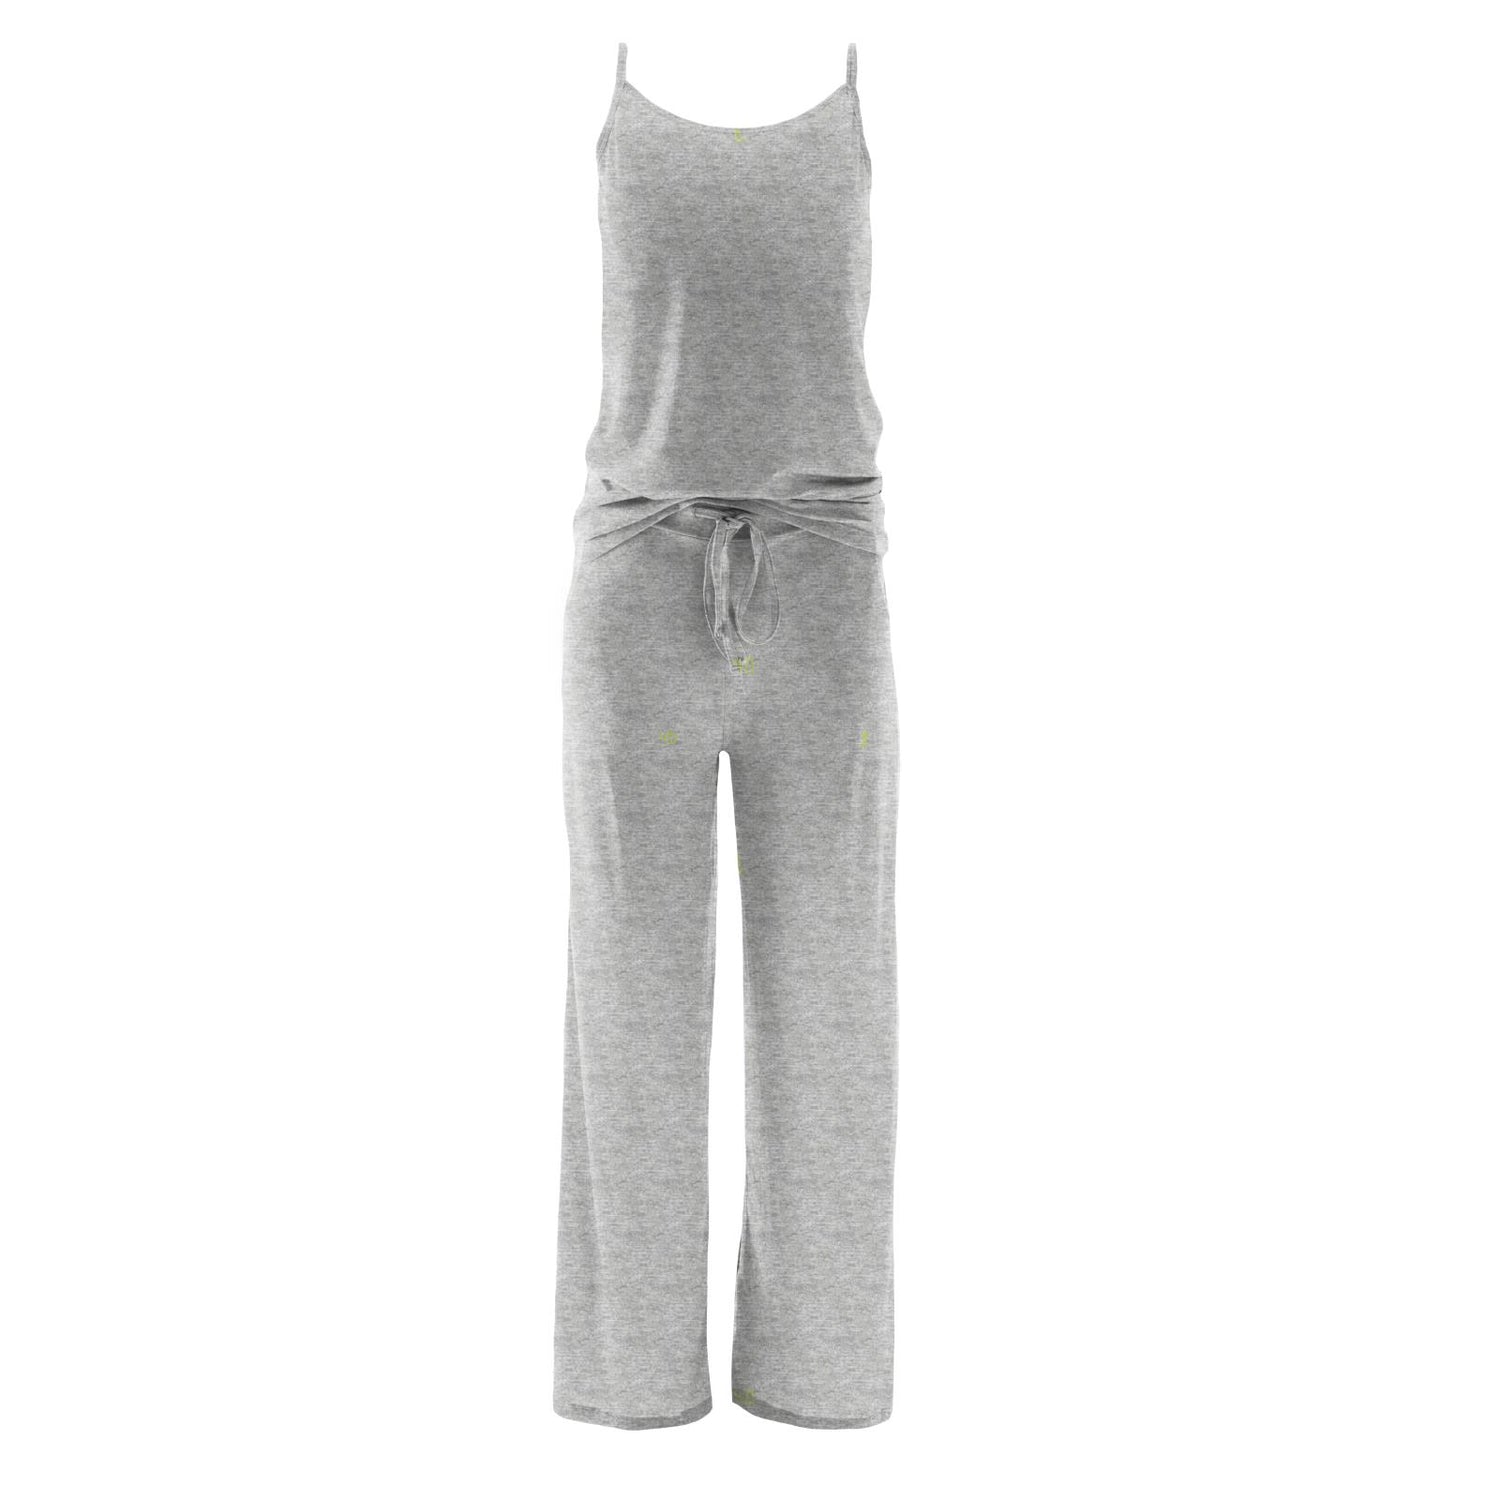 Women's Cami and Lounge Pants Pajama Set in Heathered Mist